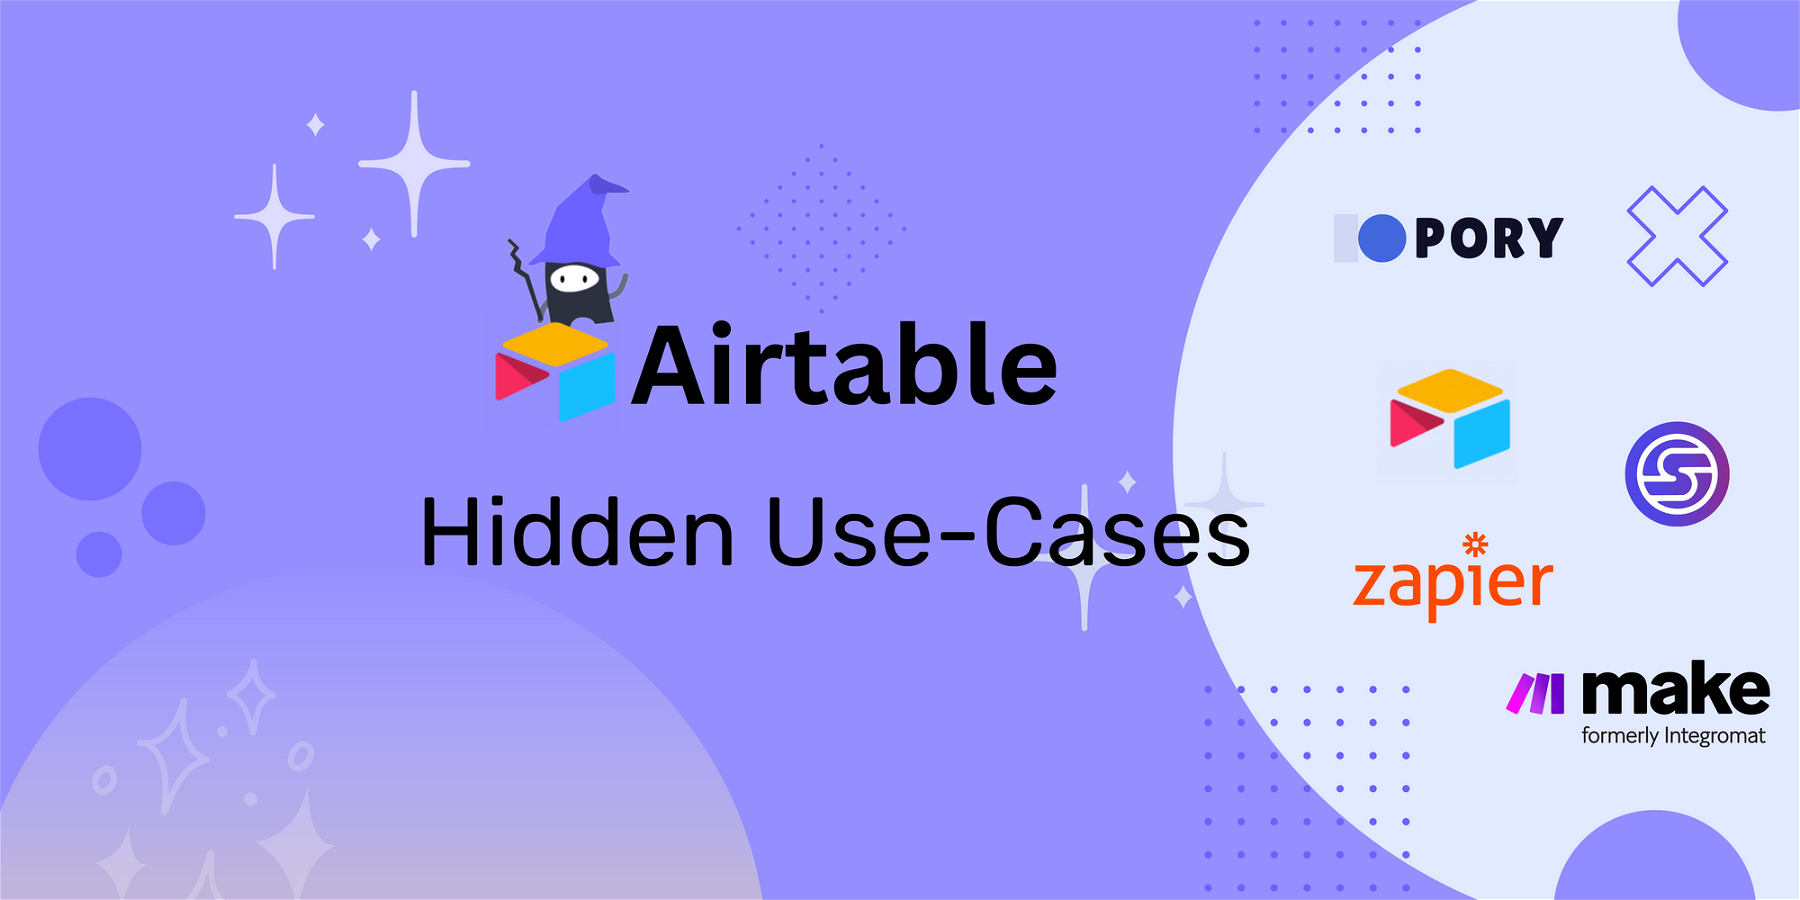 Did you know that Airtable has a wide range of use-cases beyond just being a spreadsheet tool?